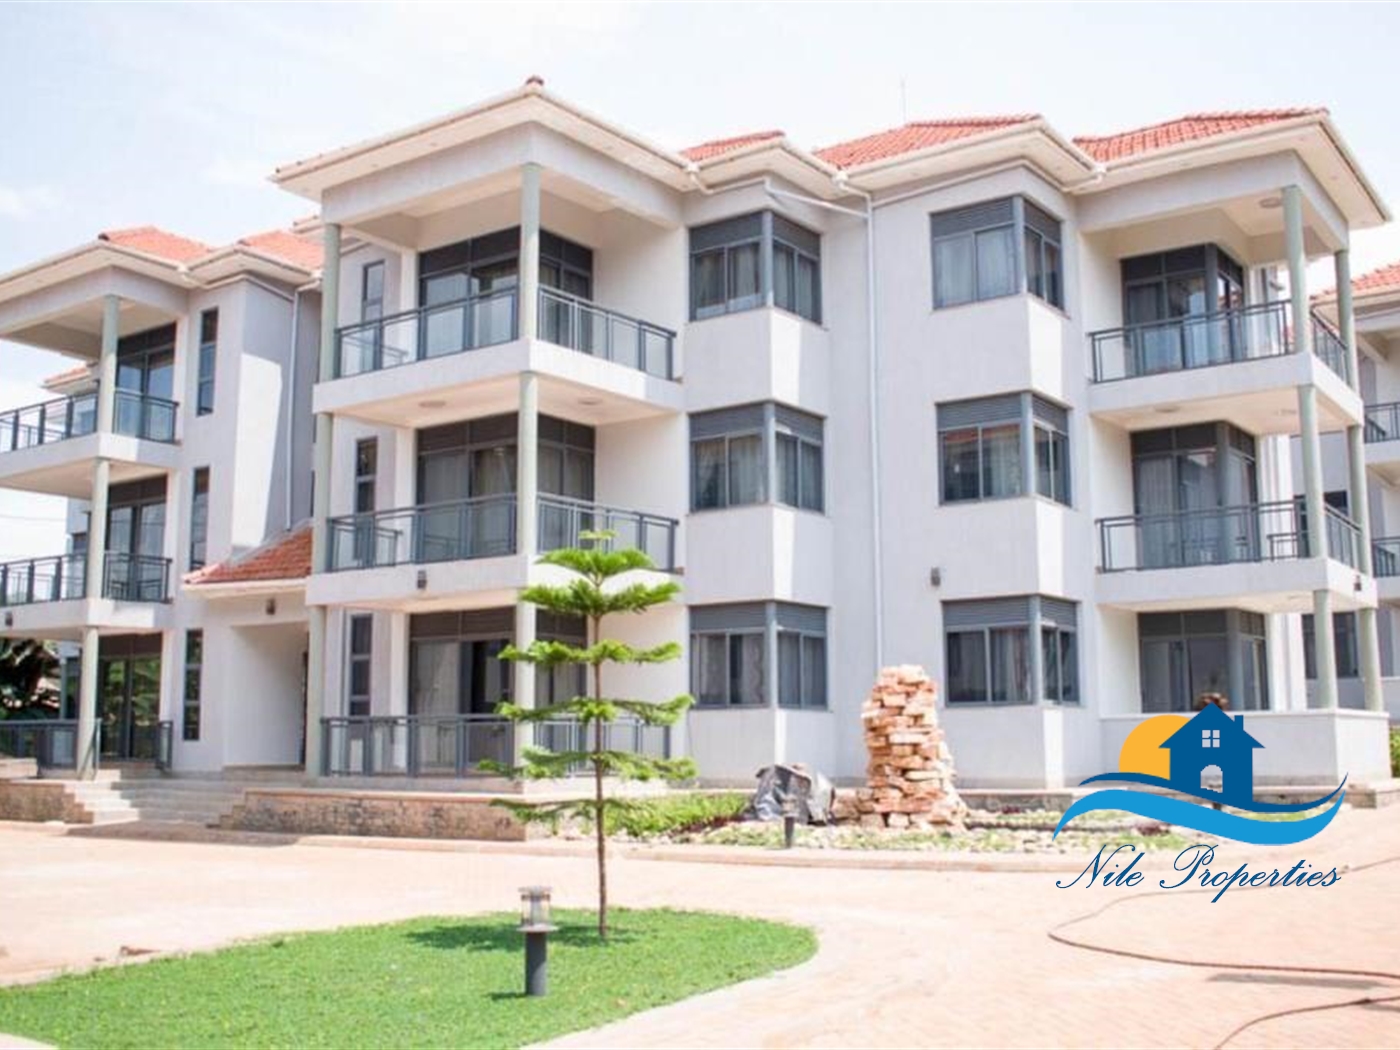 Apartment block for rent in Masese Jinja